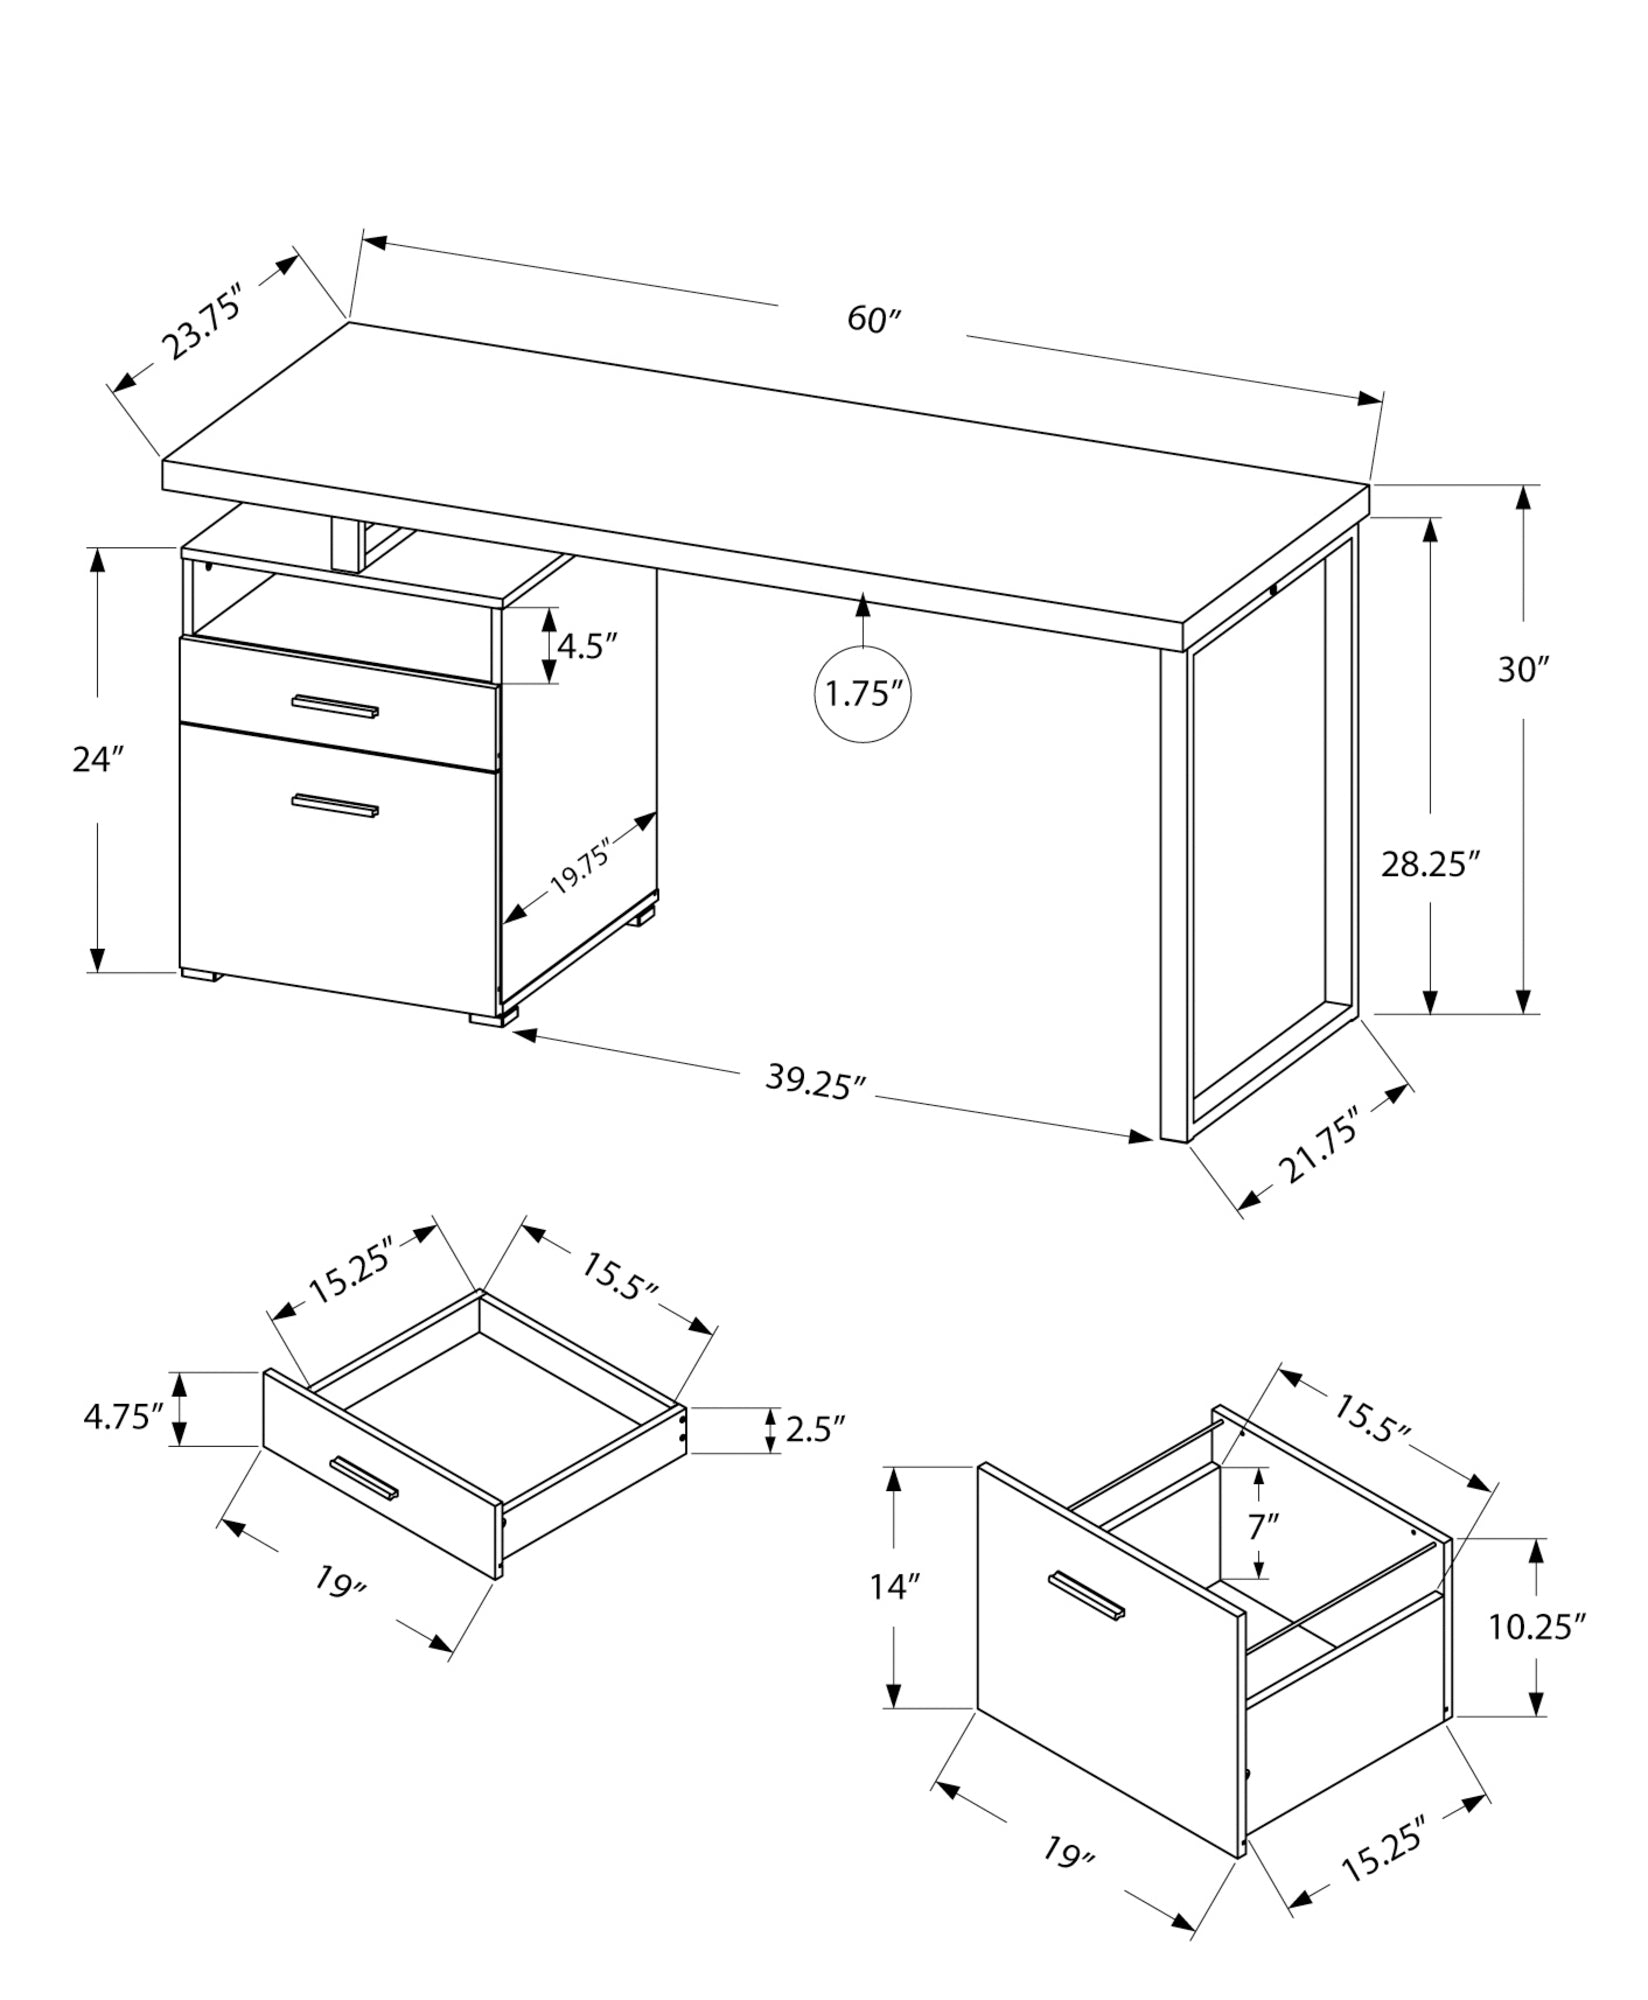 MN-197144    Computer Desk, Home Office, Laptop, Left, Right Set-Up, Storage Drawers, 60"L, Metal, Laminate, White, Contemporary, Modern